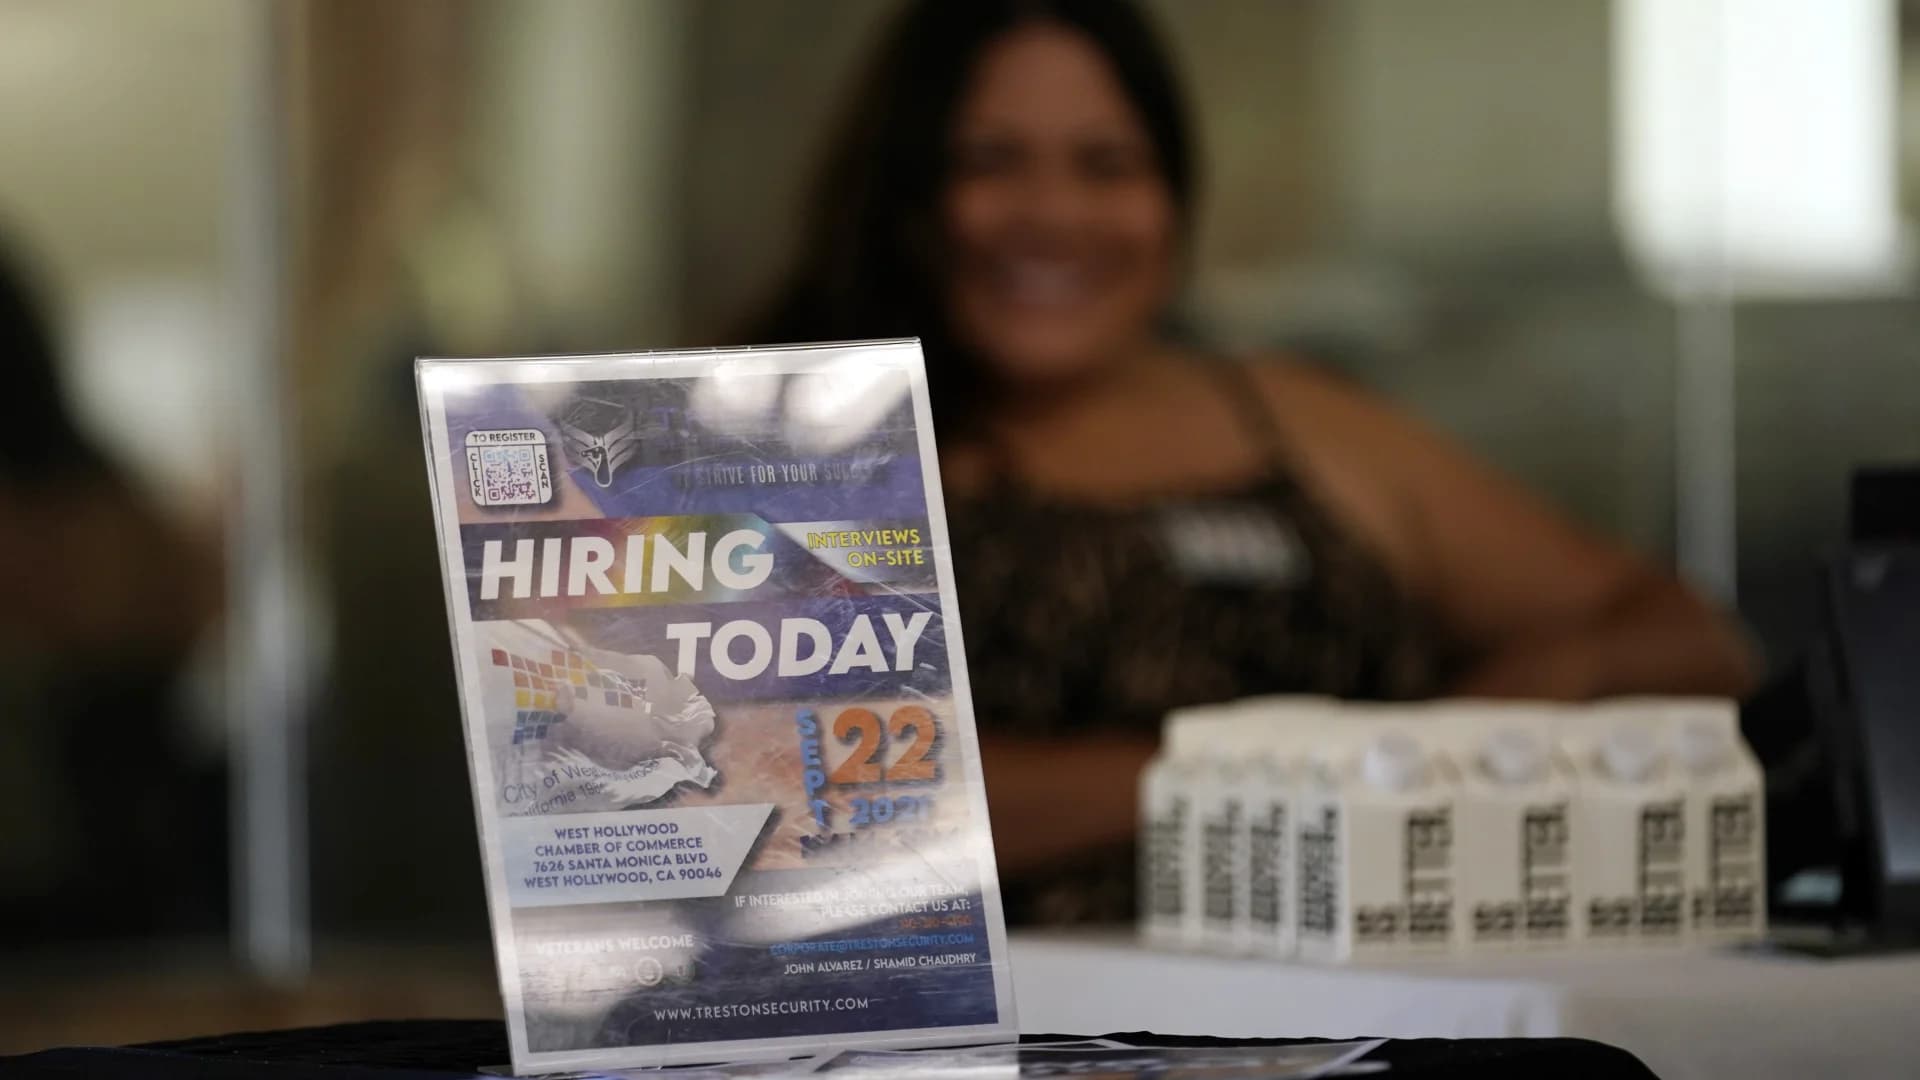 US jobless claims fall to 326,000, first drop in four weeks